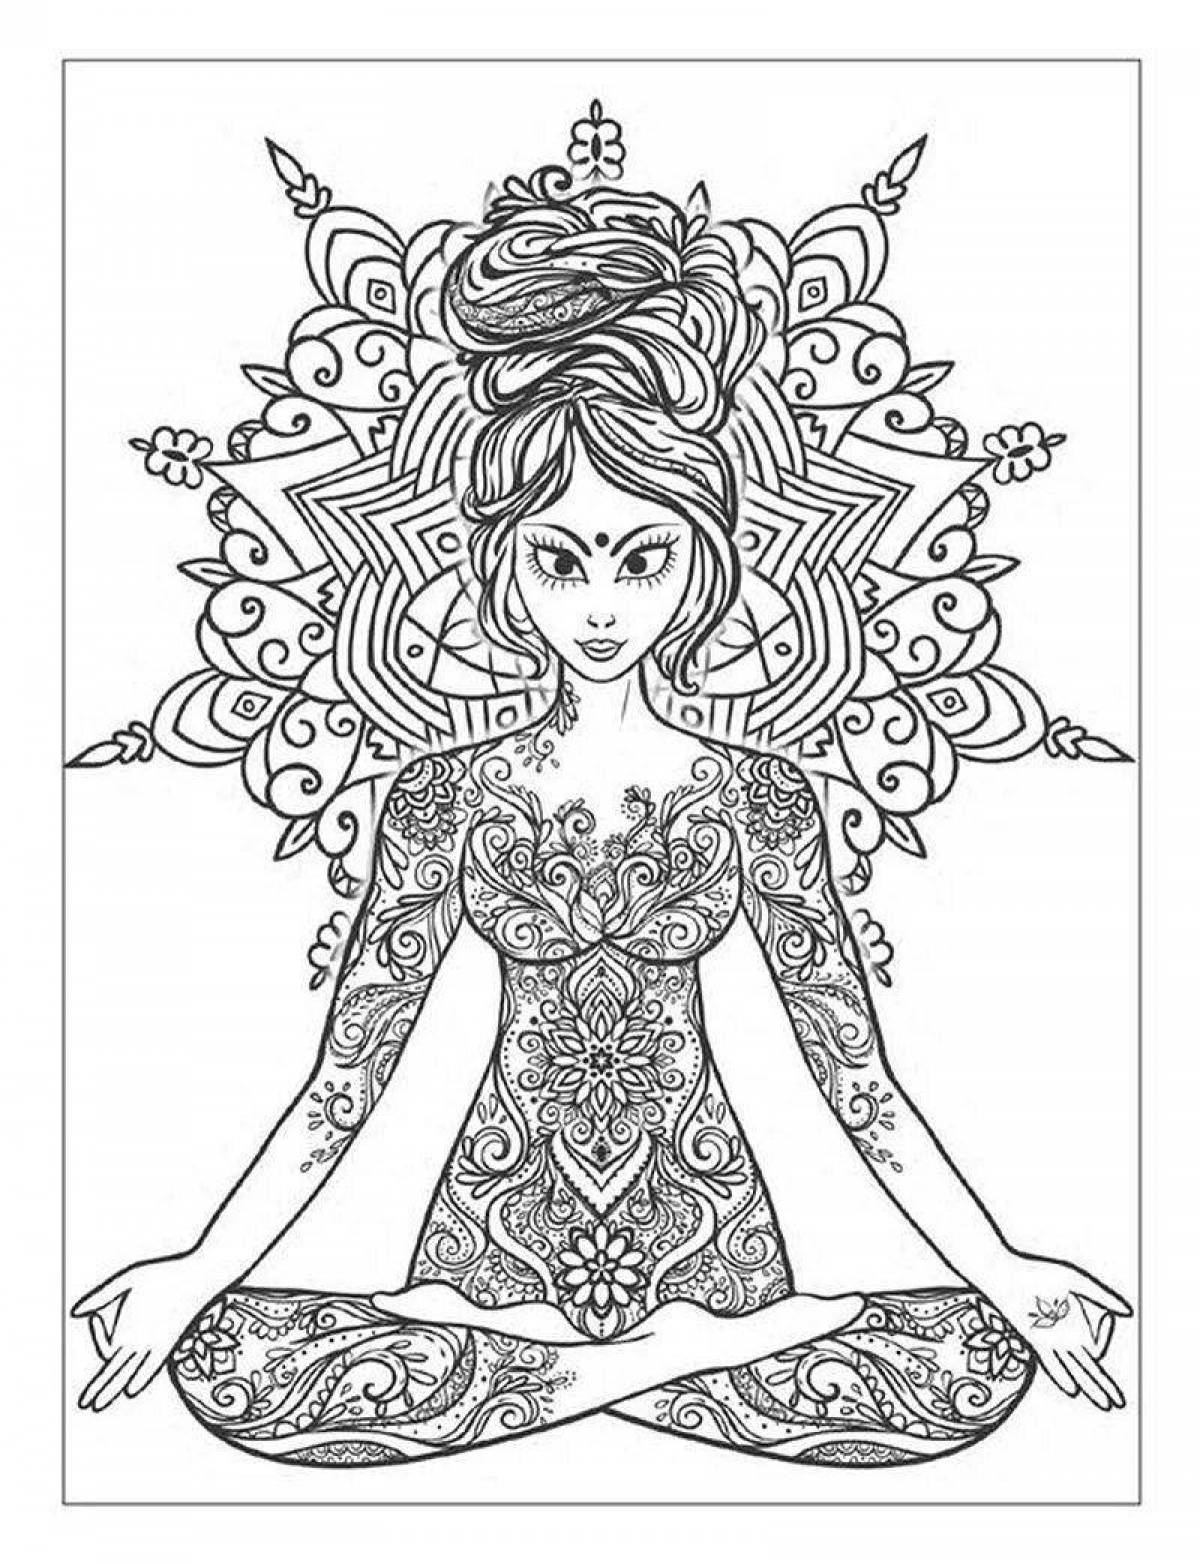 Colorful coloring book for meditation and relaxation